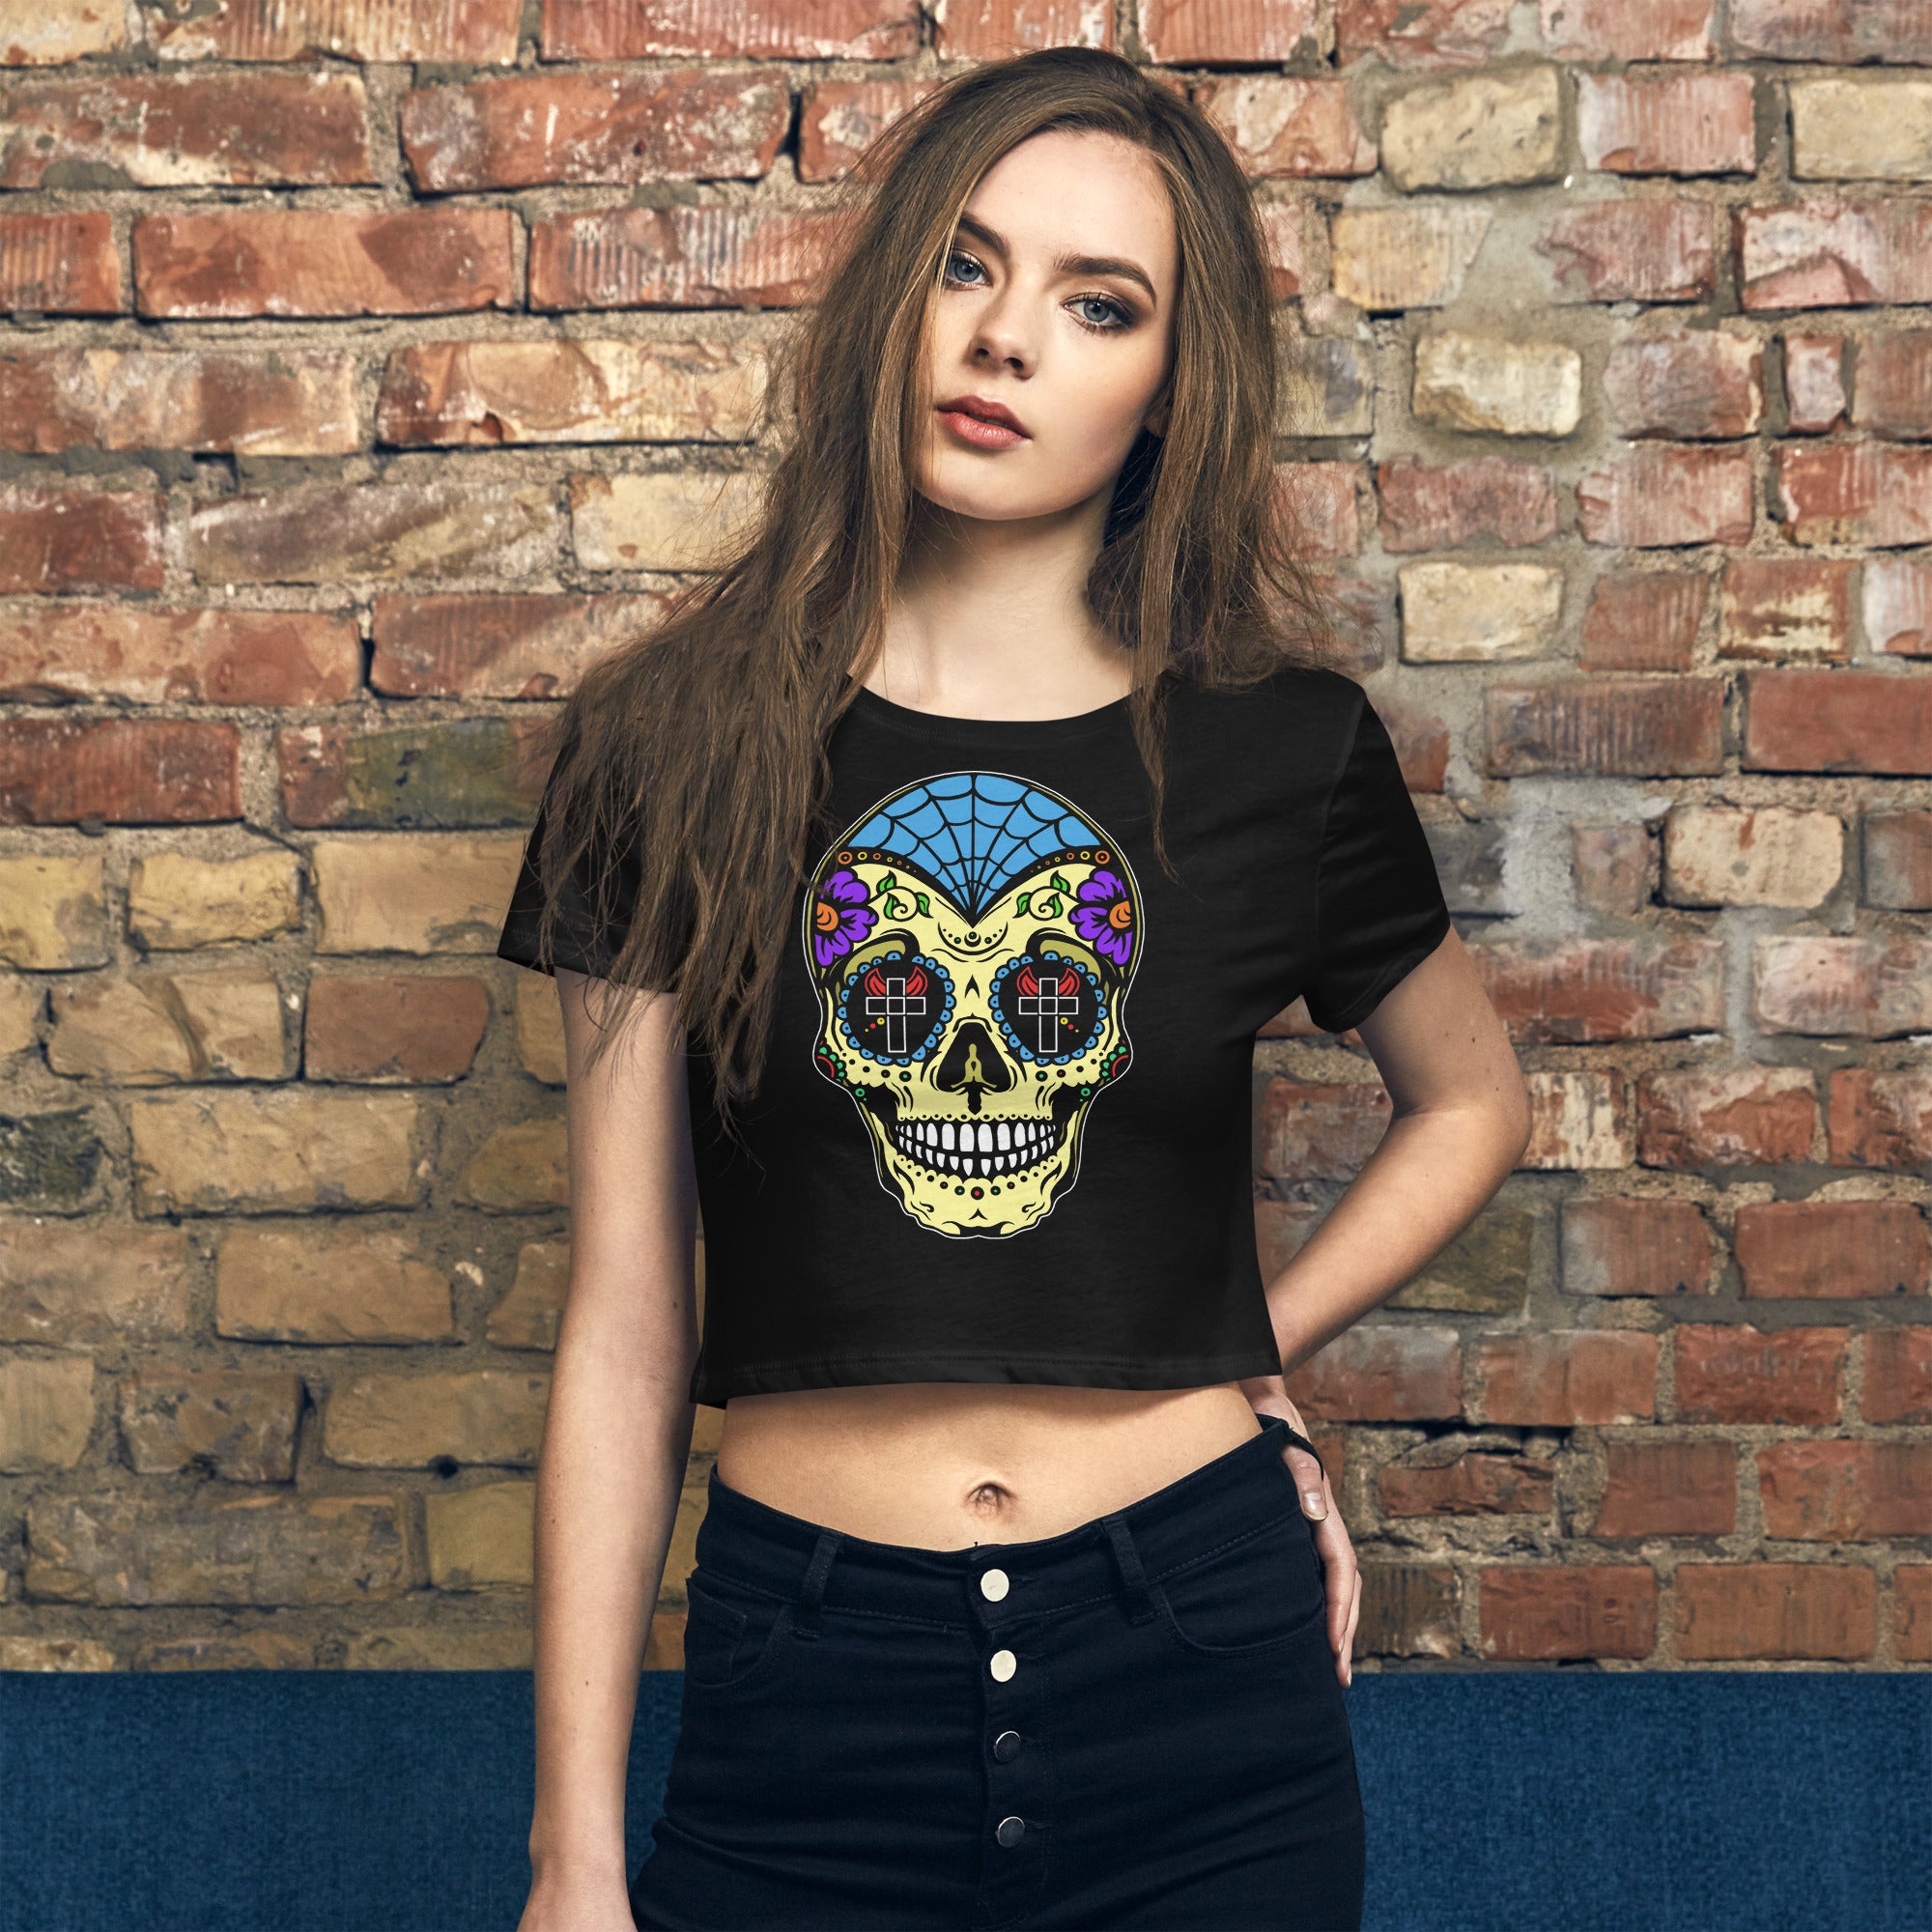 Colorful Sugar Skull Day of the Dead Halloween Women’s Crop Tee - Edge of Life Designs